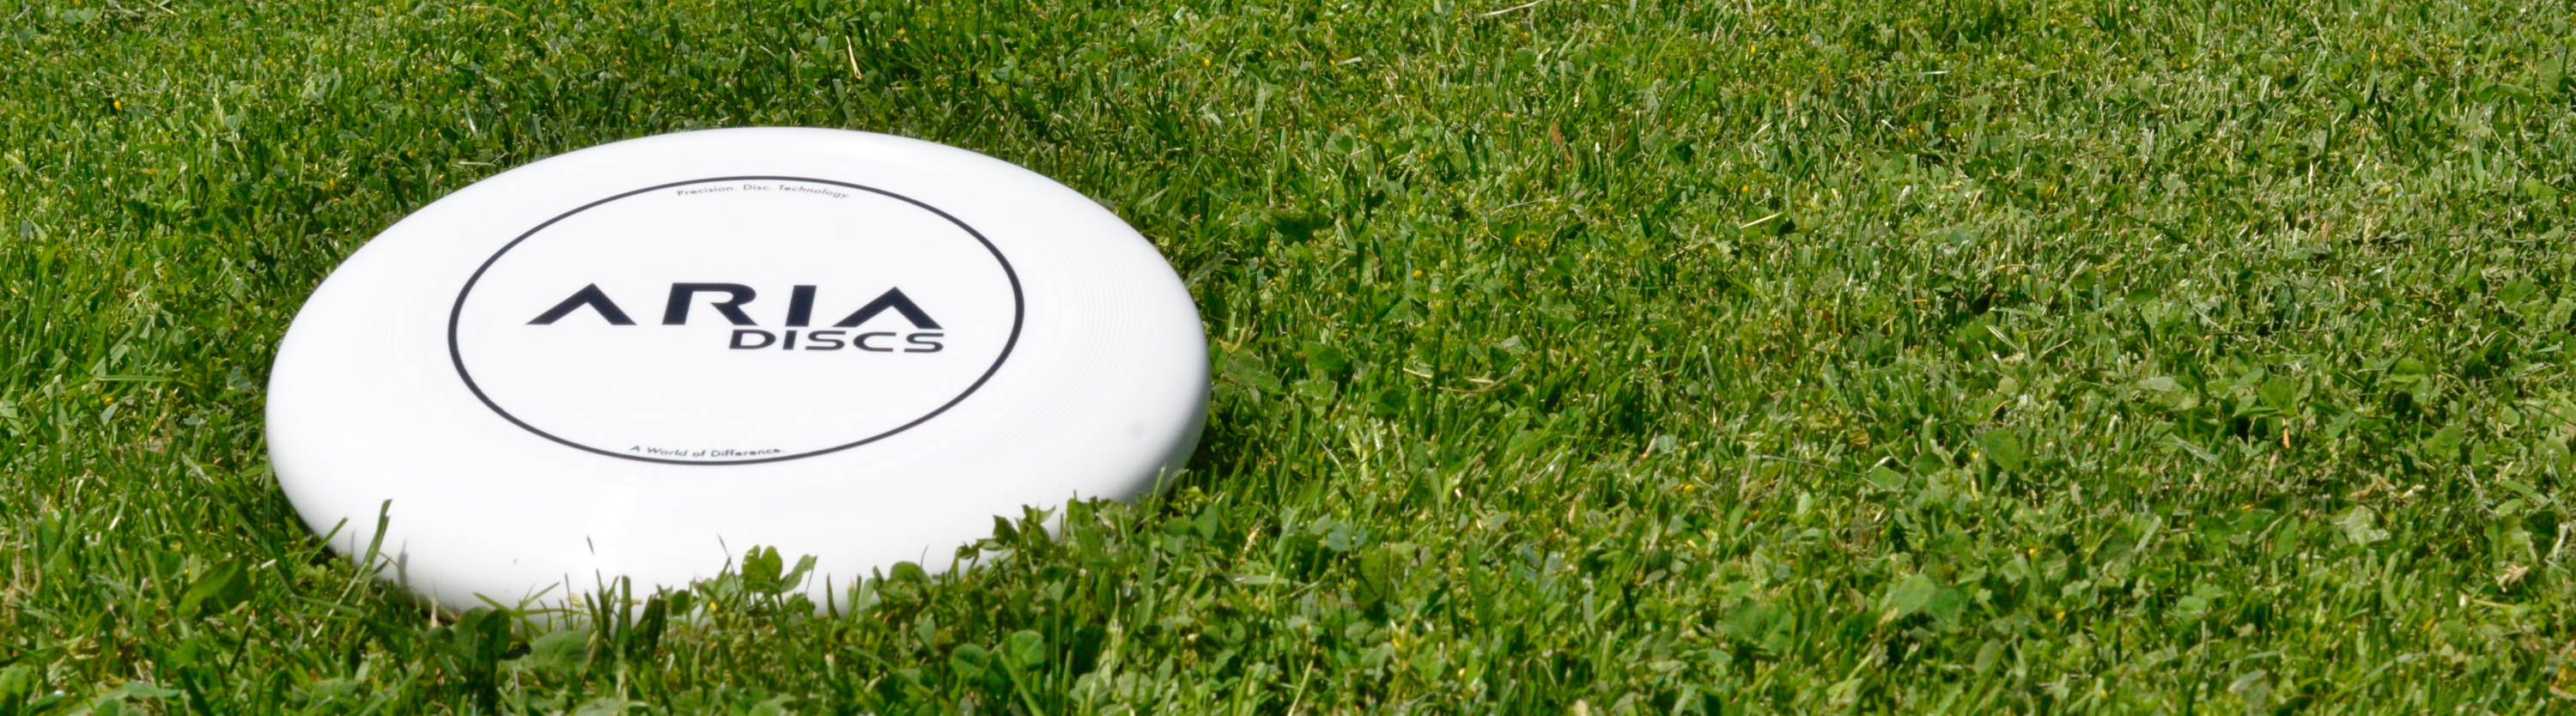 ARIA professional official ultimate flying disc for the sport commonly known as 'ultimate frisbee' disc picture on grass